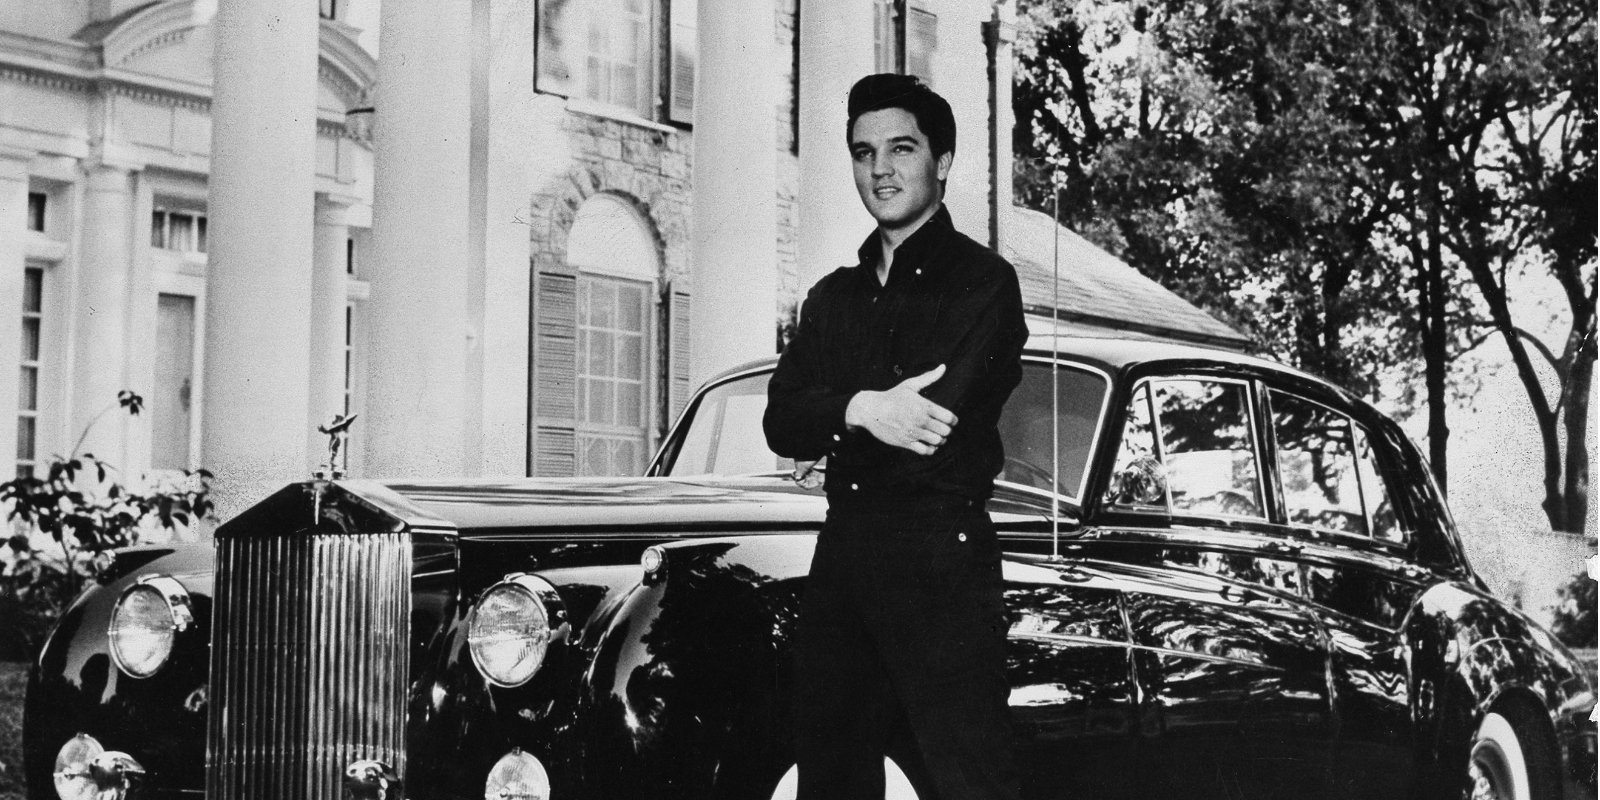 Elvis Presley poses in front of Graceland in a black and white image.